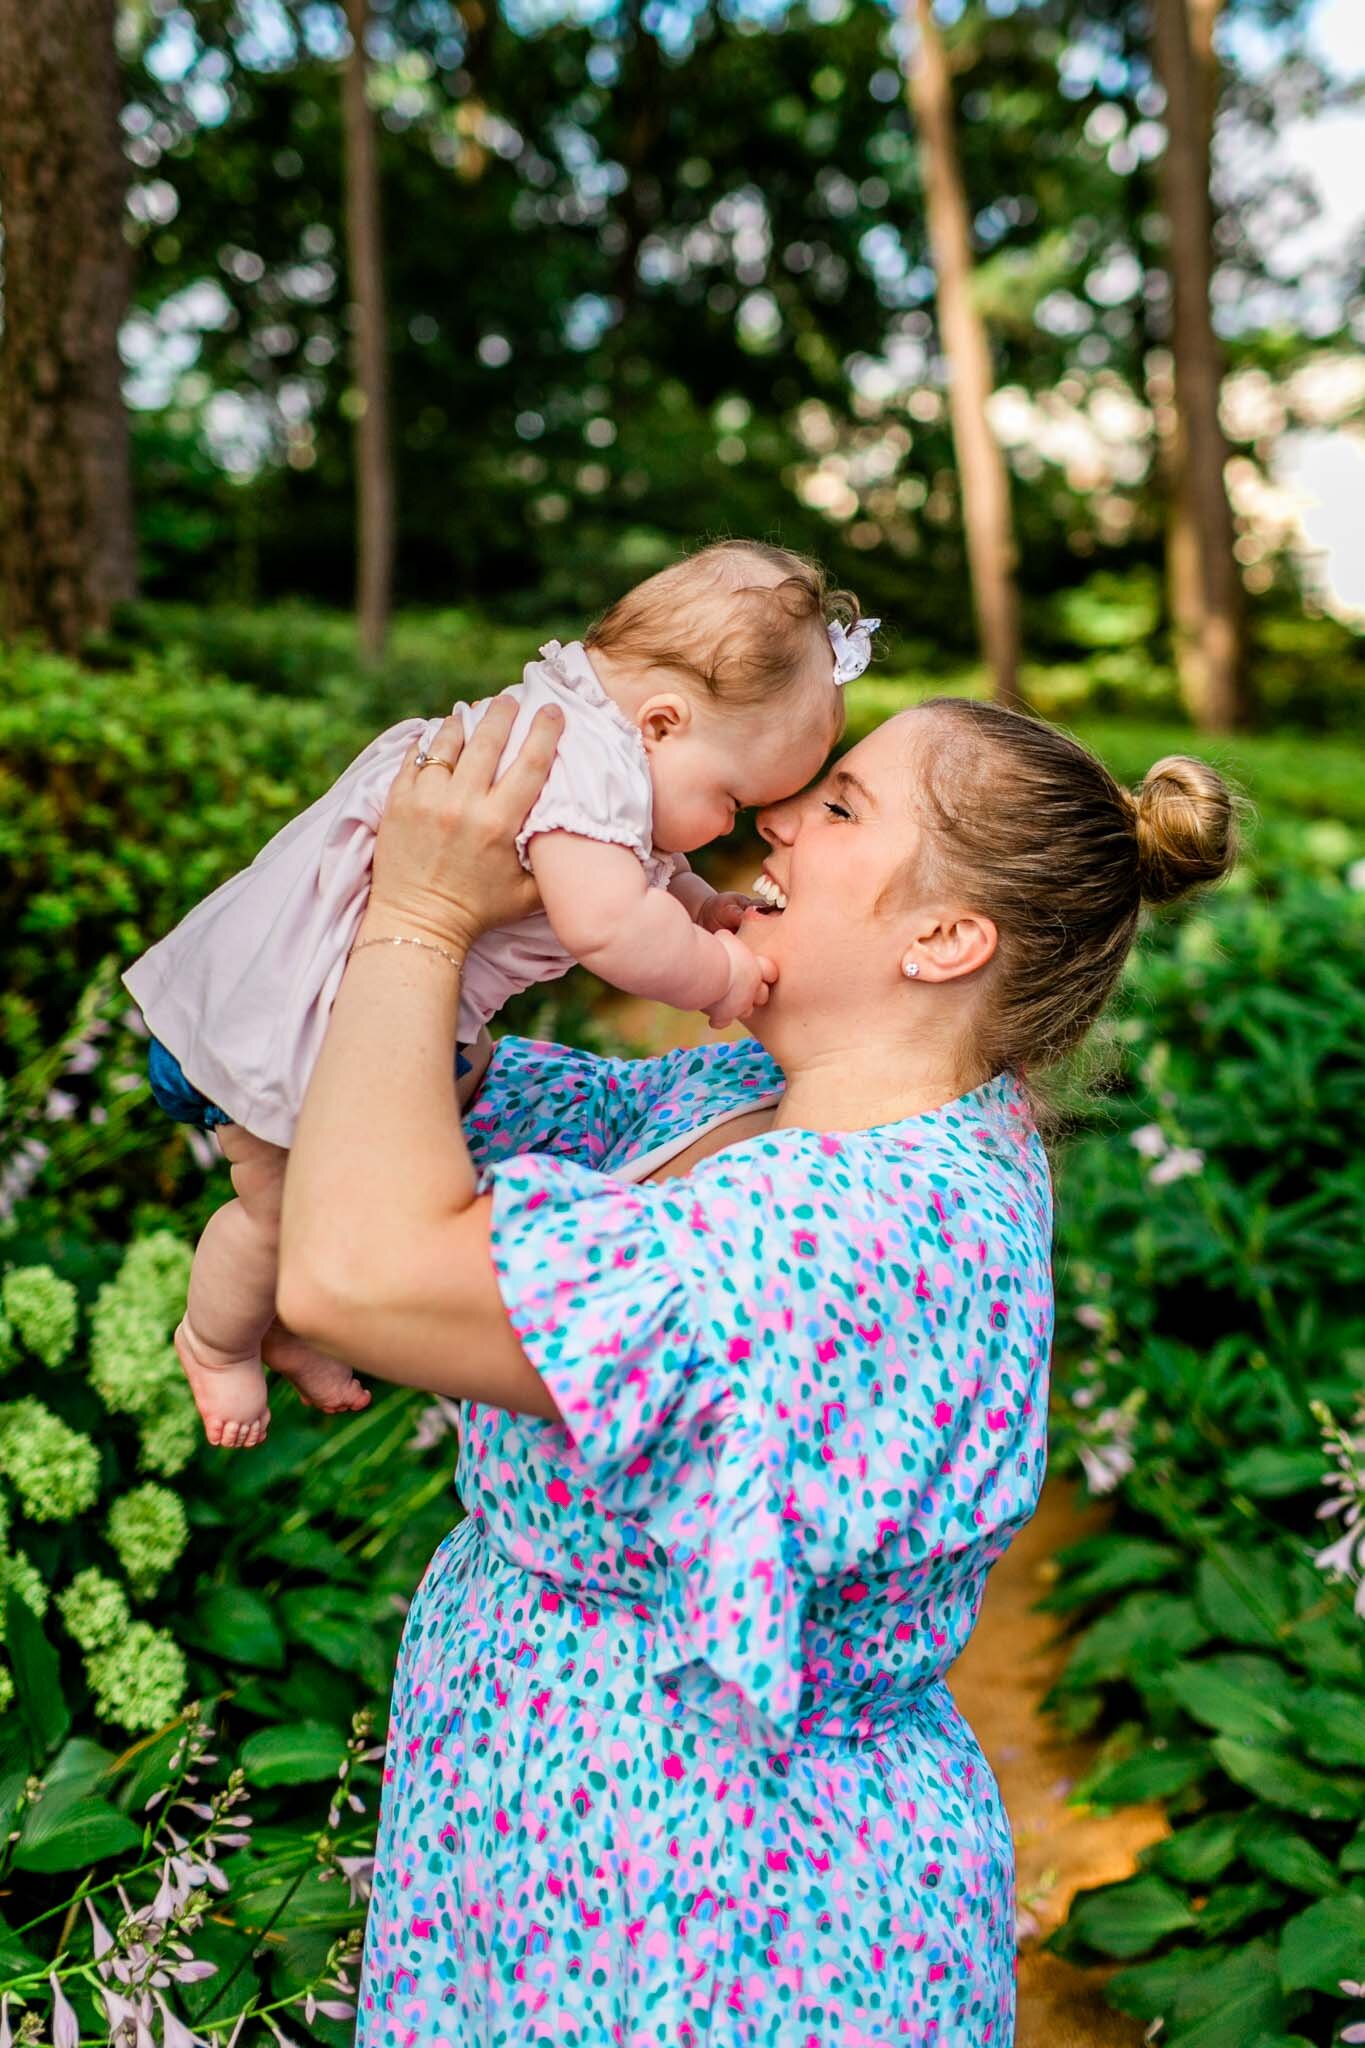 Candid moment of mother kissing baby | Raleigh Family Photographer | By G. Lin Photography | WRAL Azalea Garden